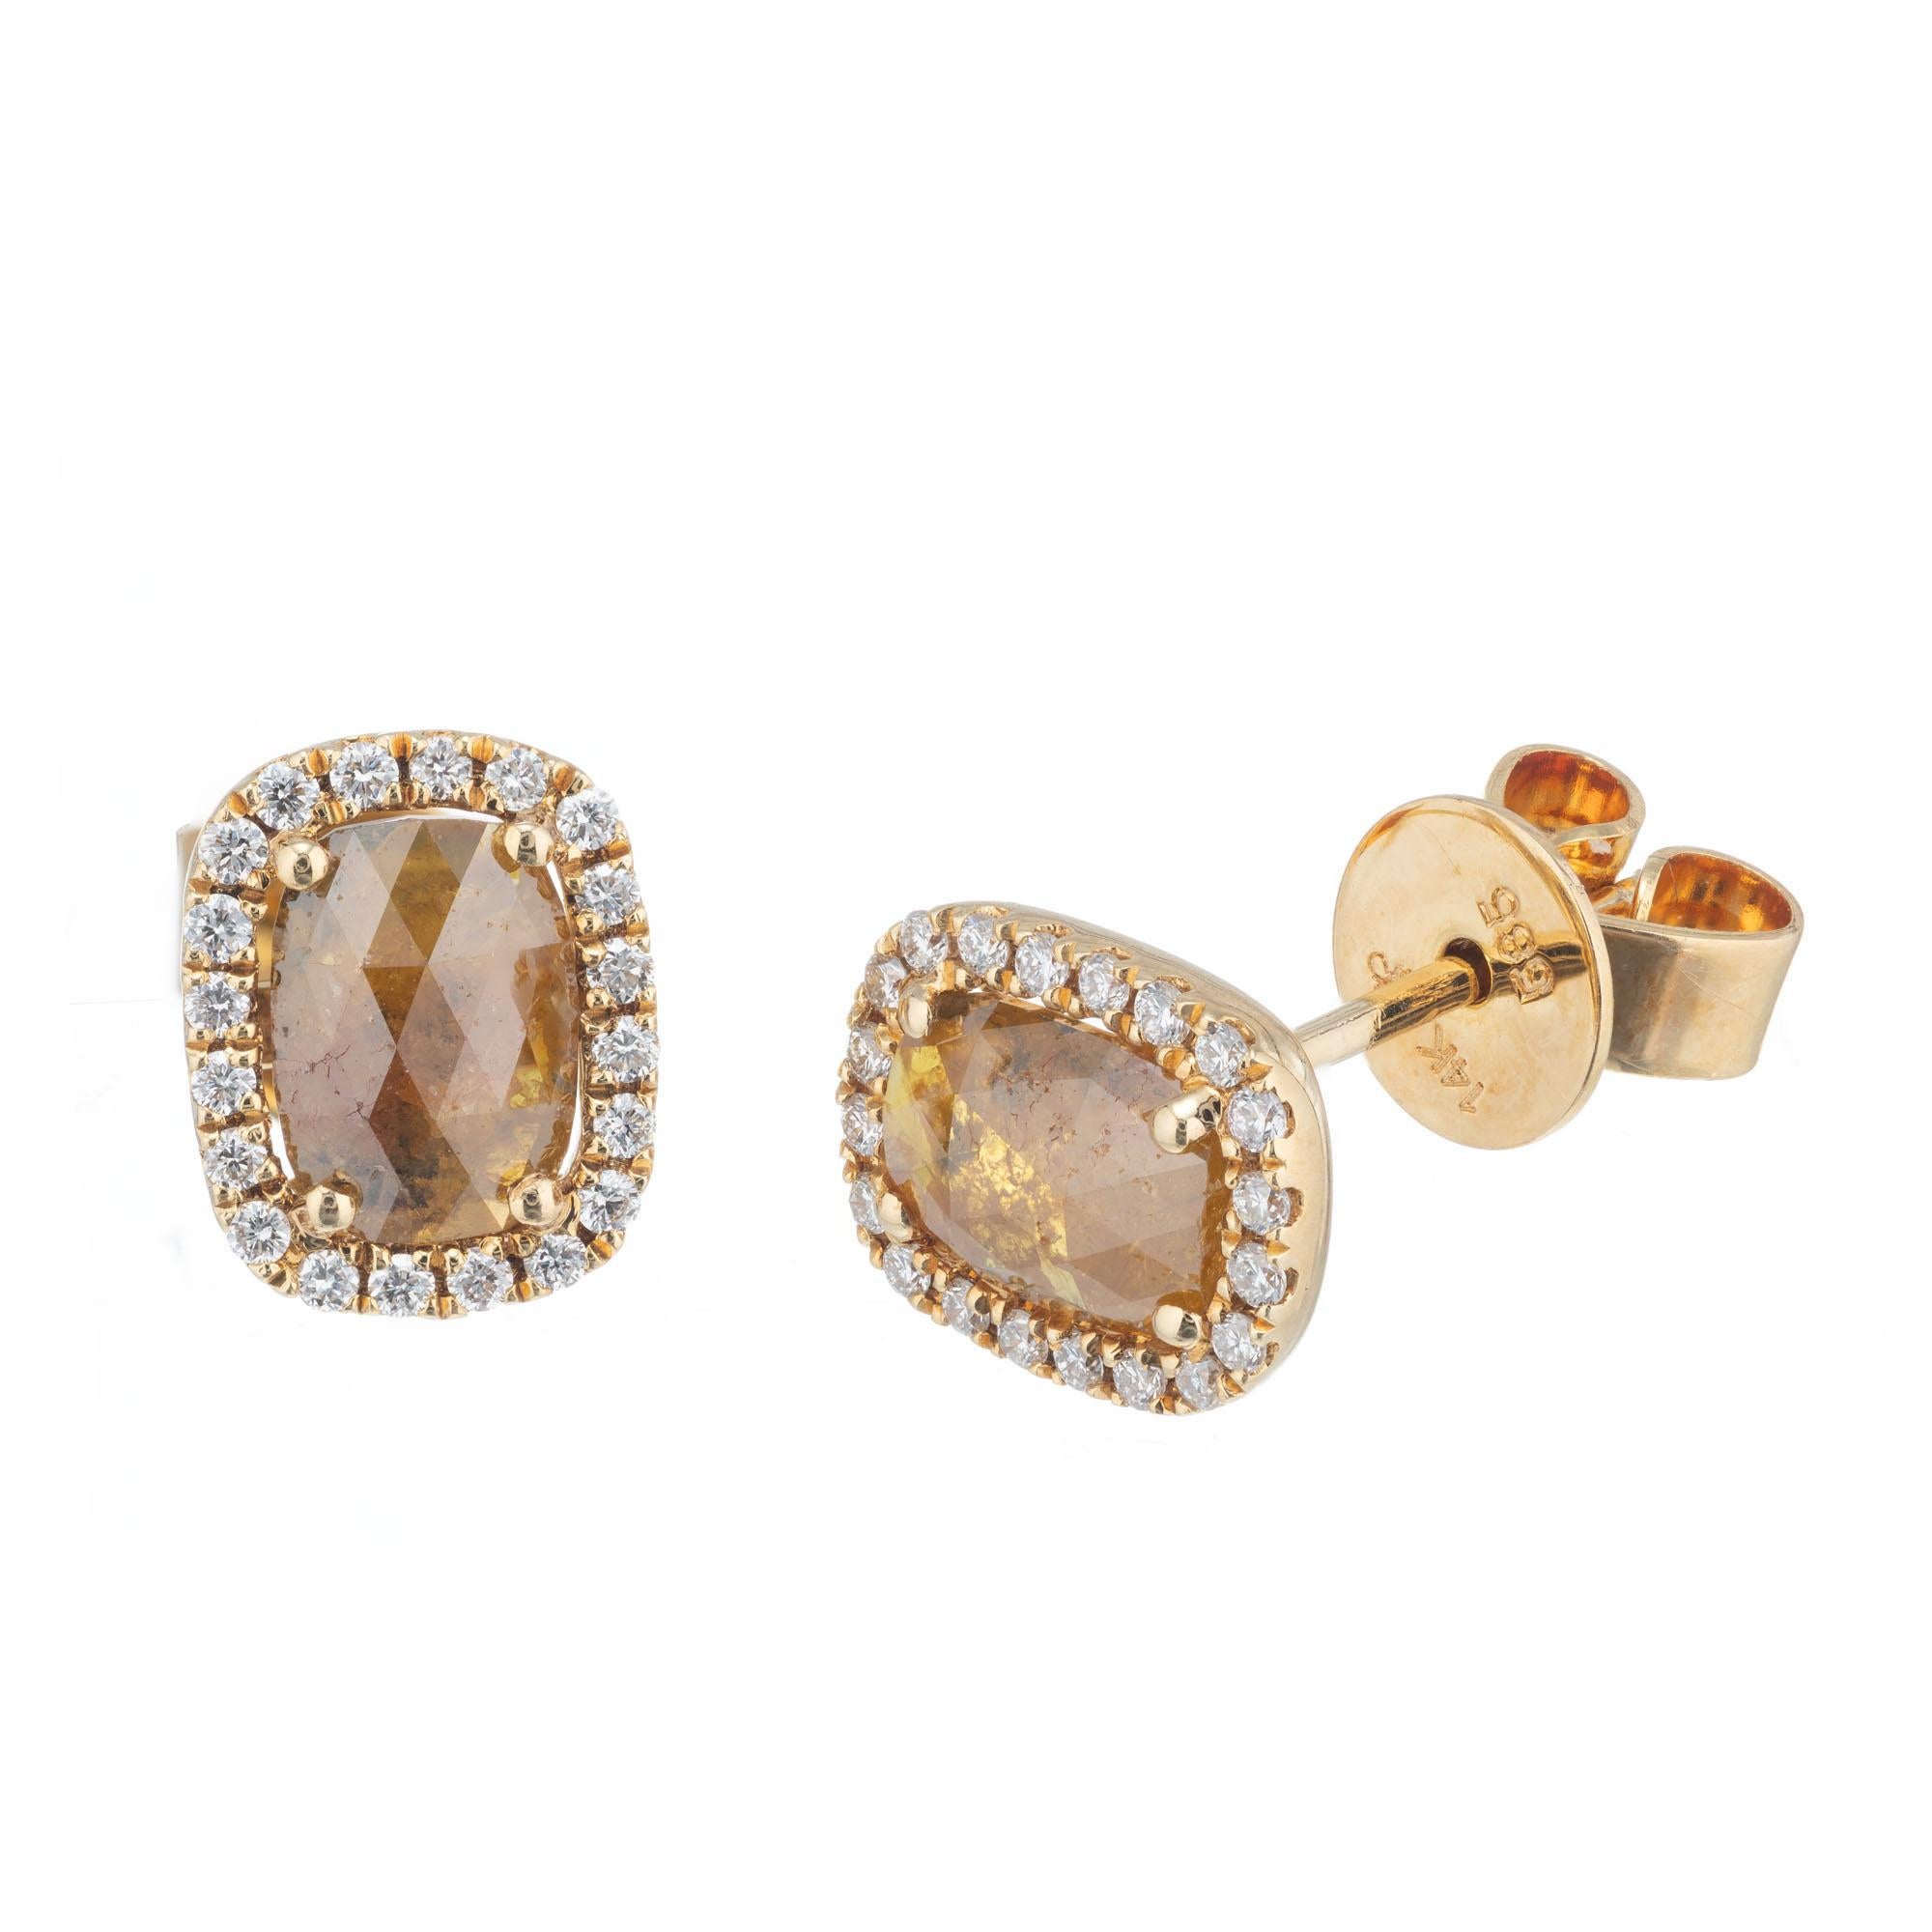 Natural deep yellow brown cushion translucent diamonds set in 14k yellow gold settings with round halo accent diamonds.  

2 cushion faceted natural color fancy deep yellow brown diamonds, approx. total weight .80cts. Natural cold fancy deep yellow